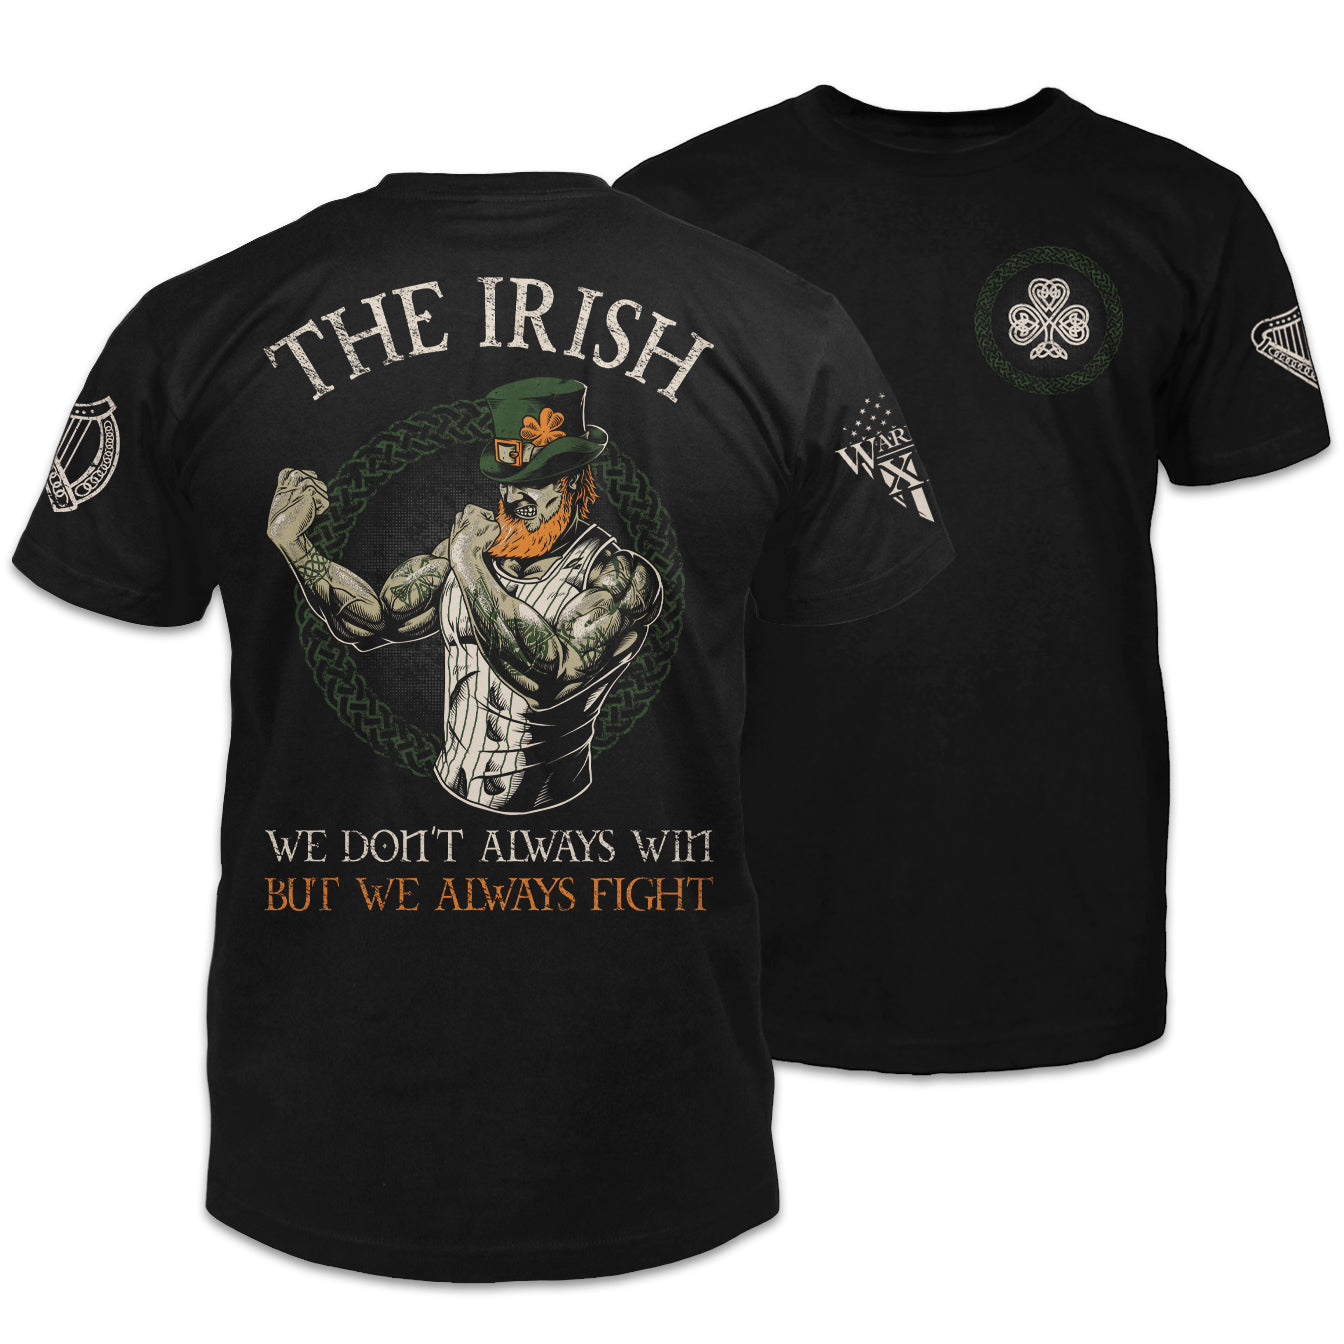 Front & back black t-shirt with the words "The Irish - We don't always win, but we always fight" with an Irish man with his fists up printed on the shirt.